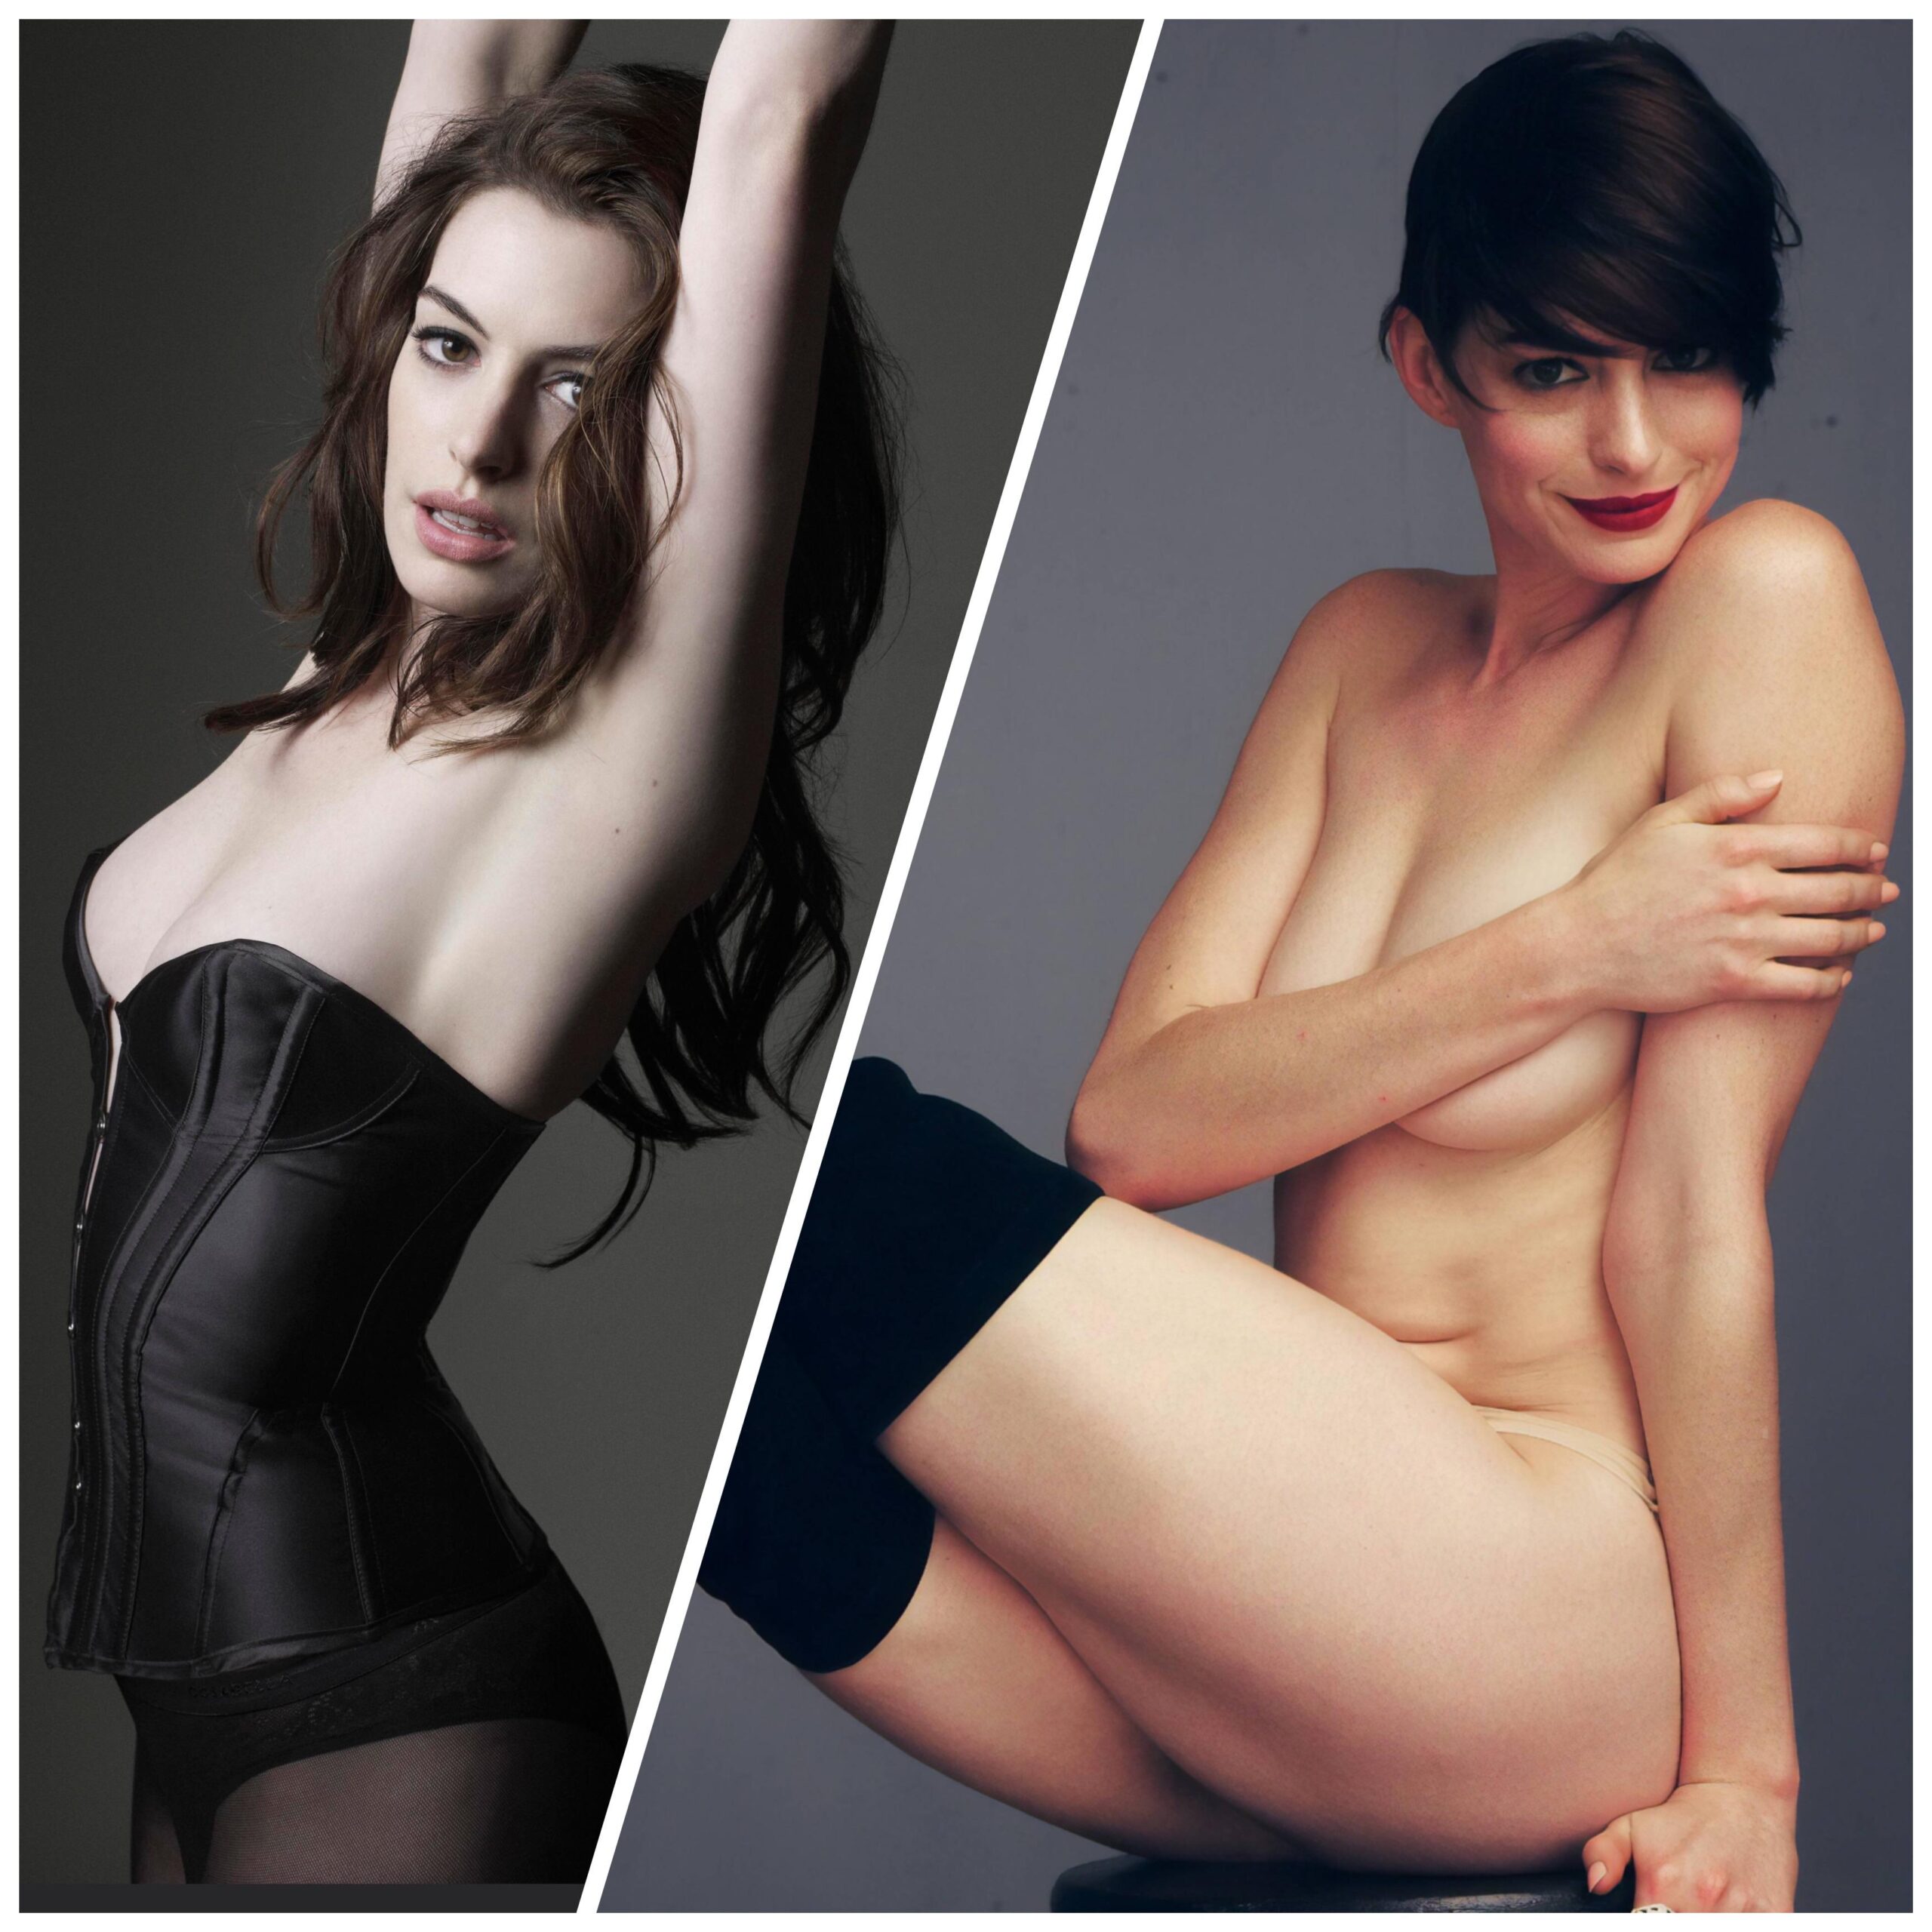 Anne Hathaway onoff